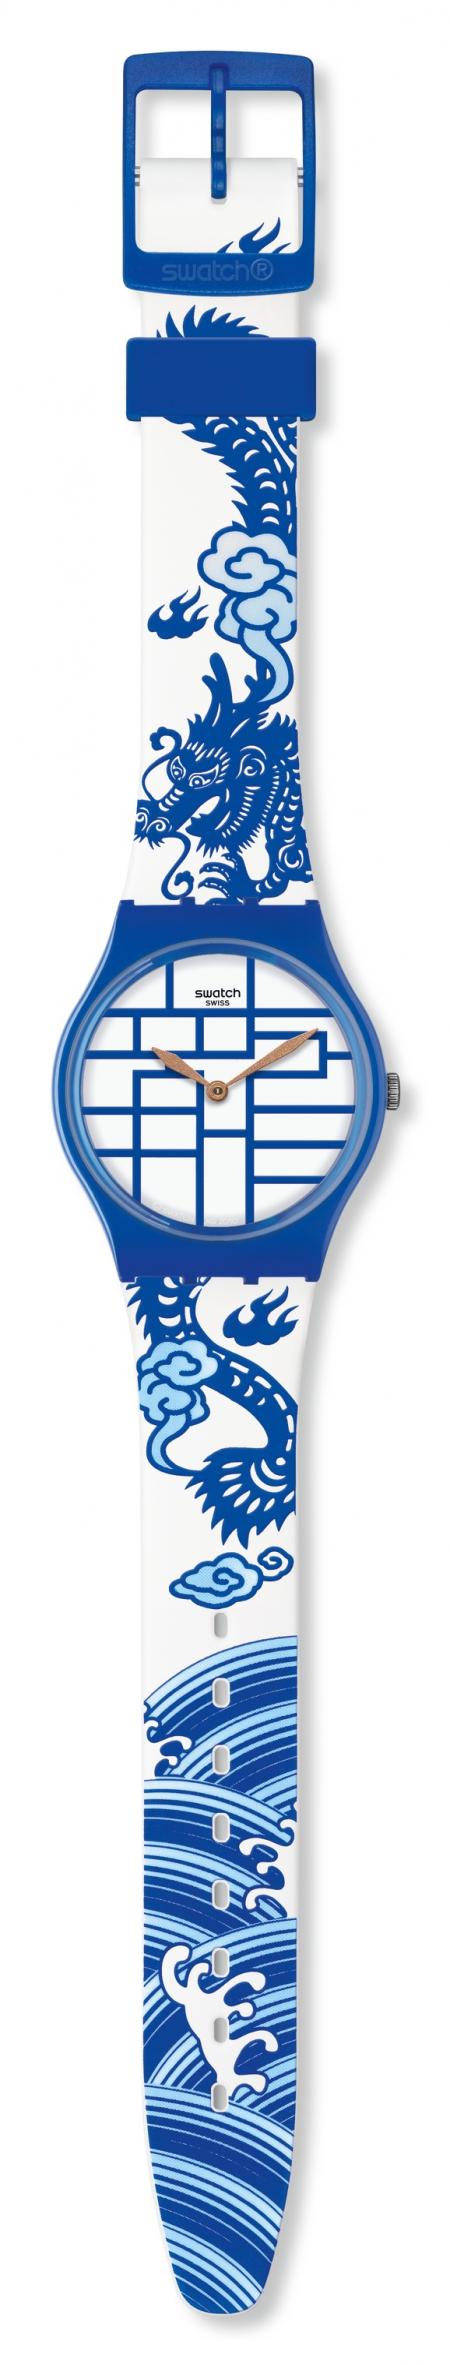 Swatch - Original Gent / Year of the Dragon